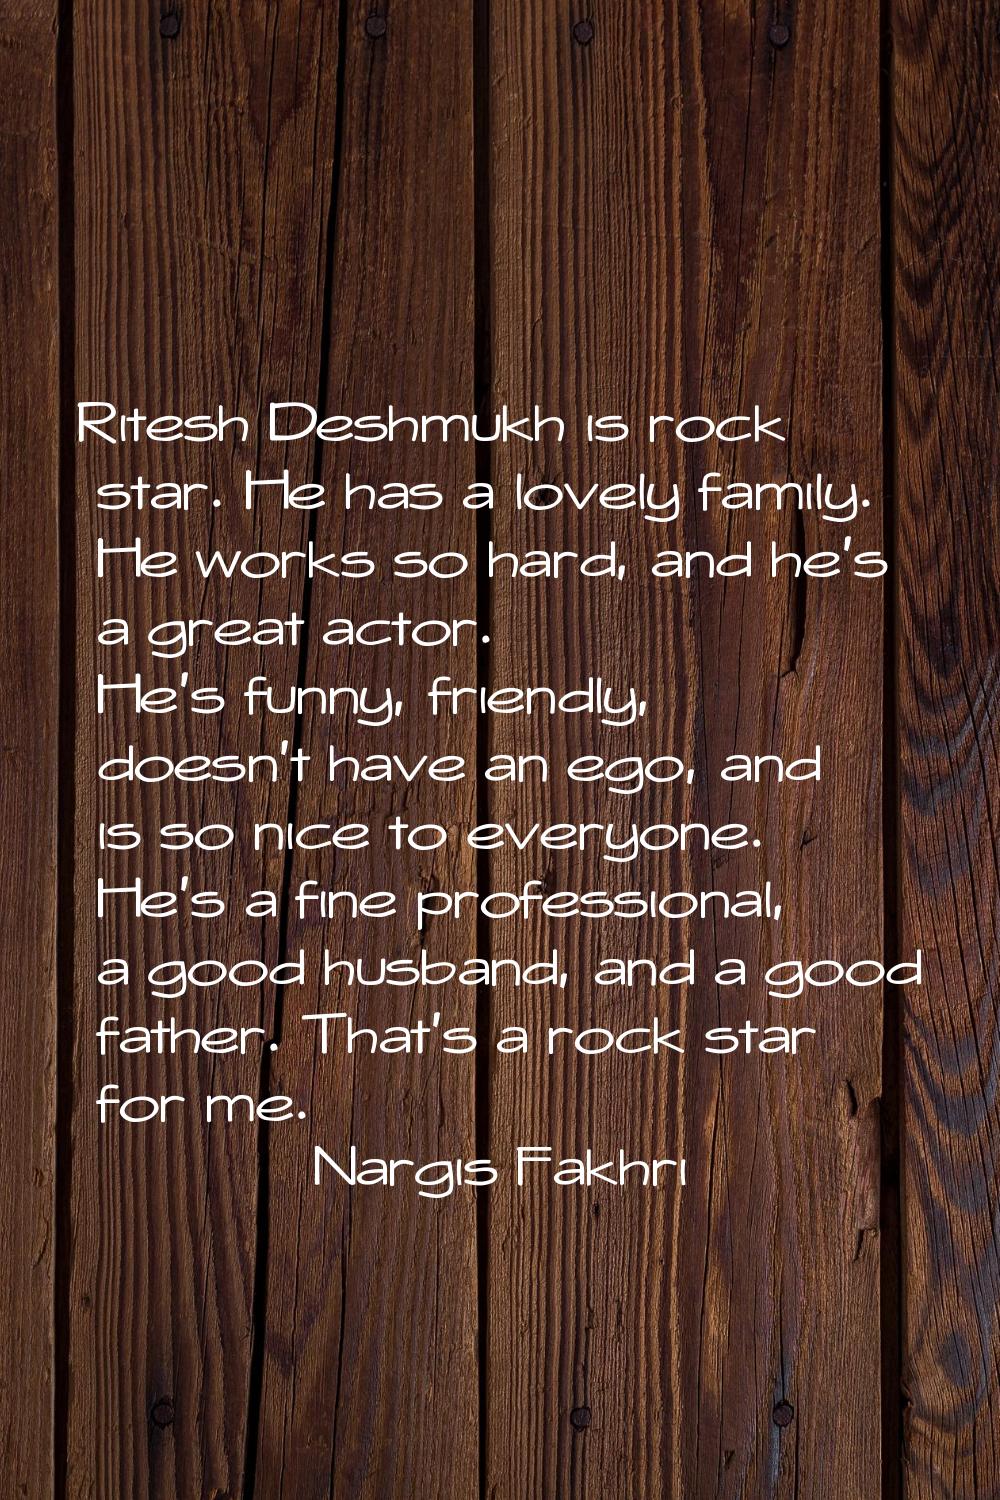 Ritesh Deshmukh is rock star. He has a lovely family. He works so hard, and he's a great actor. He'